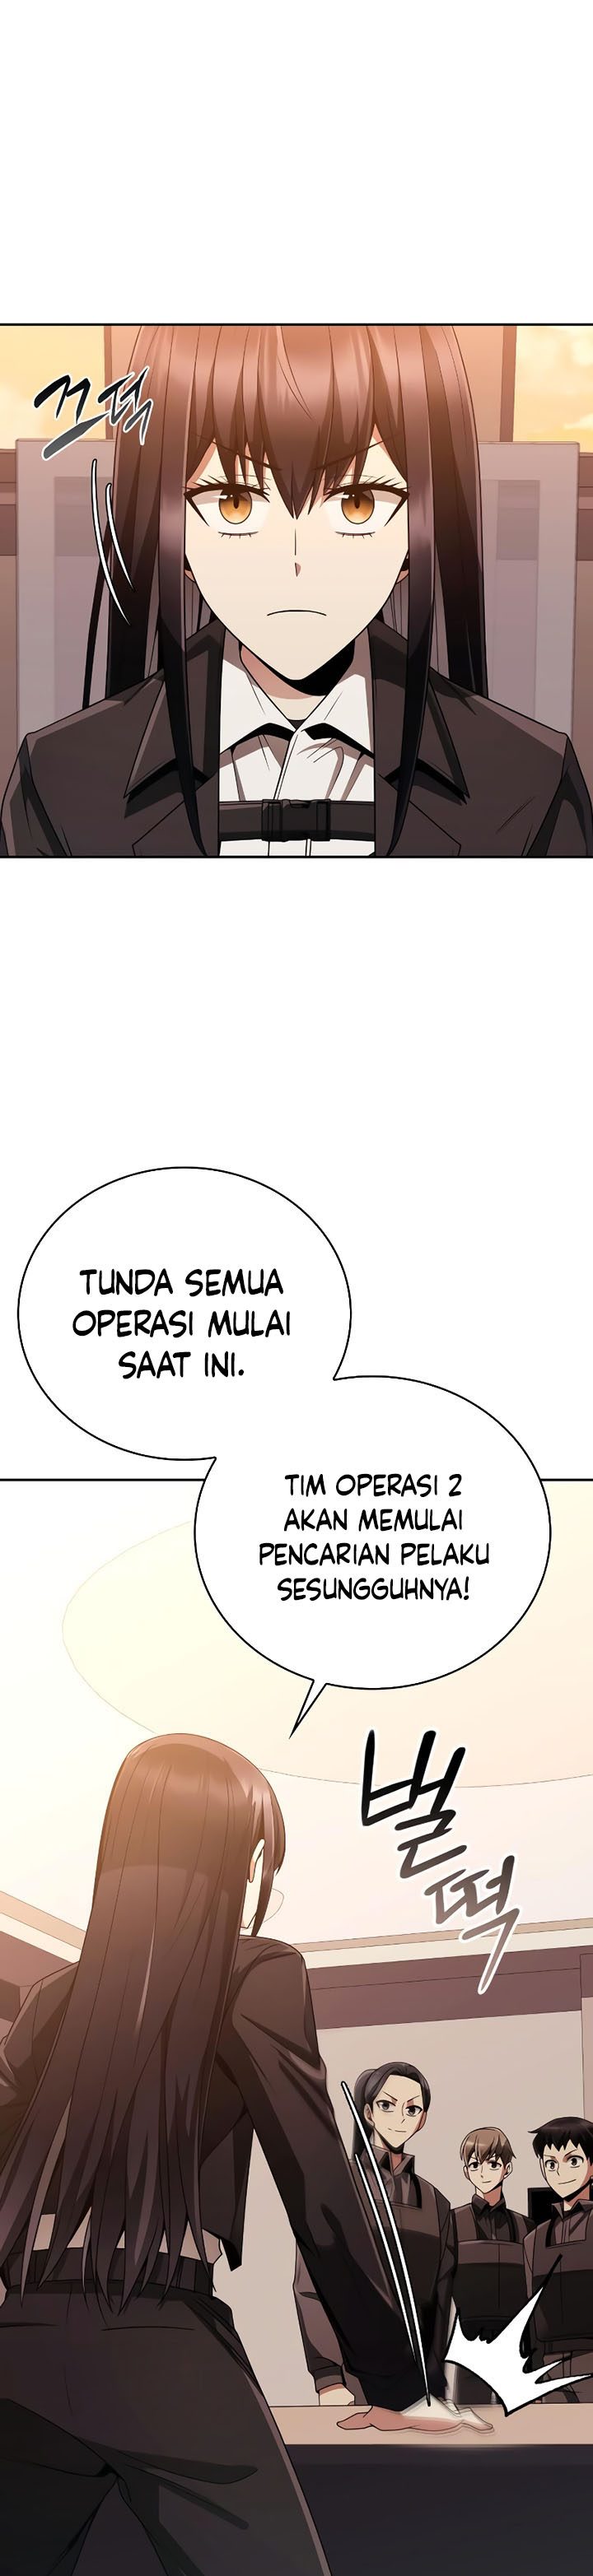 Dilarang COPAS - situs resmi www.mangacanblog.com - Komik clever cleaning life of the returned genius hunter 020 - chapter 20 21 Indonesia clever cleaning life of the returned genius hunter 020 - chapter 20 Terbaru 7|Baca Manga Komik Indonesia|Mangacan